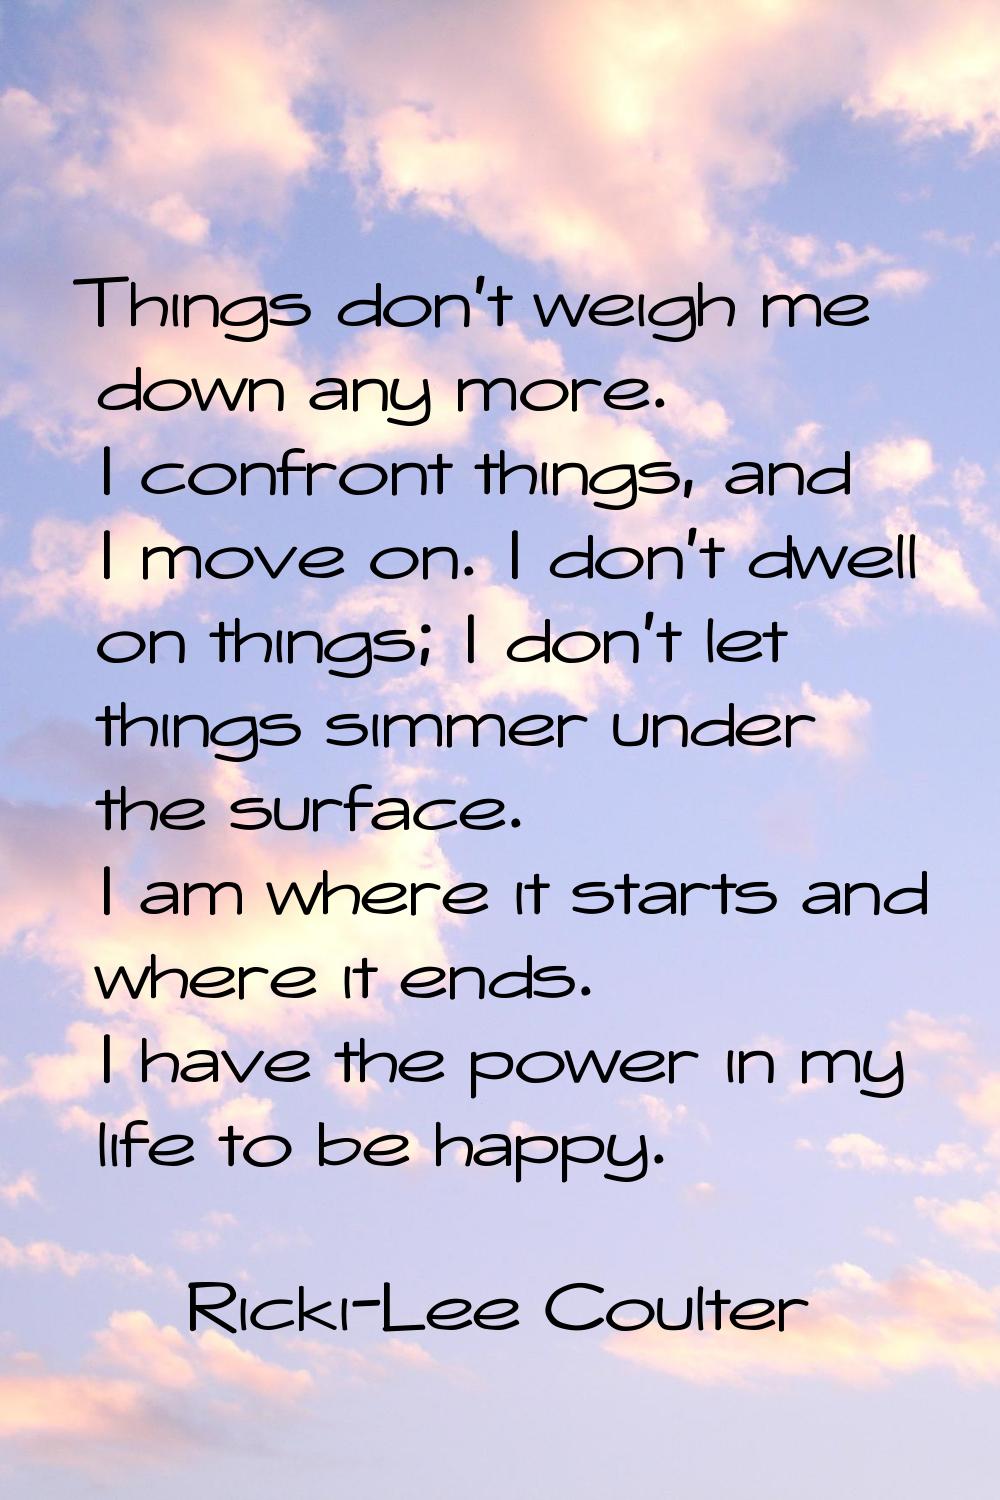 Things don't weigh me down any more. I confront things, and I move on. I don't dwell on things; I d